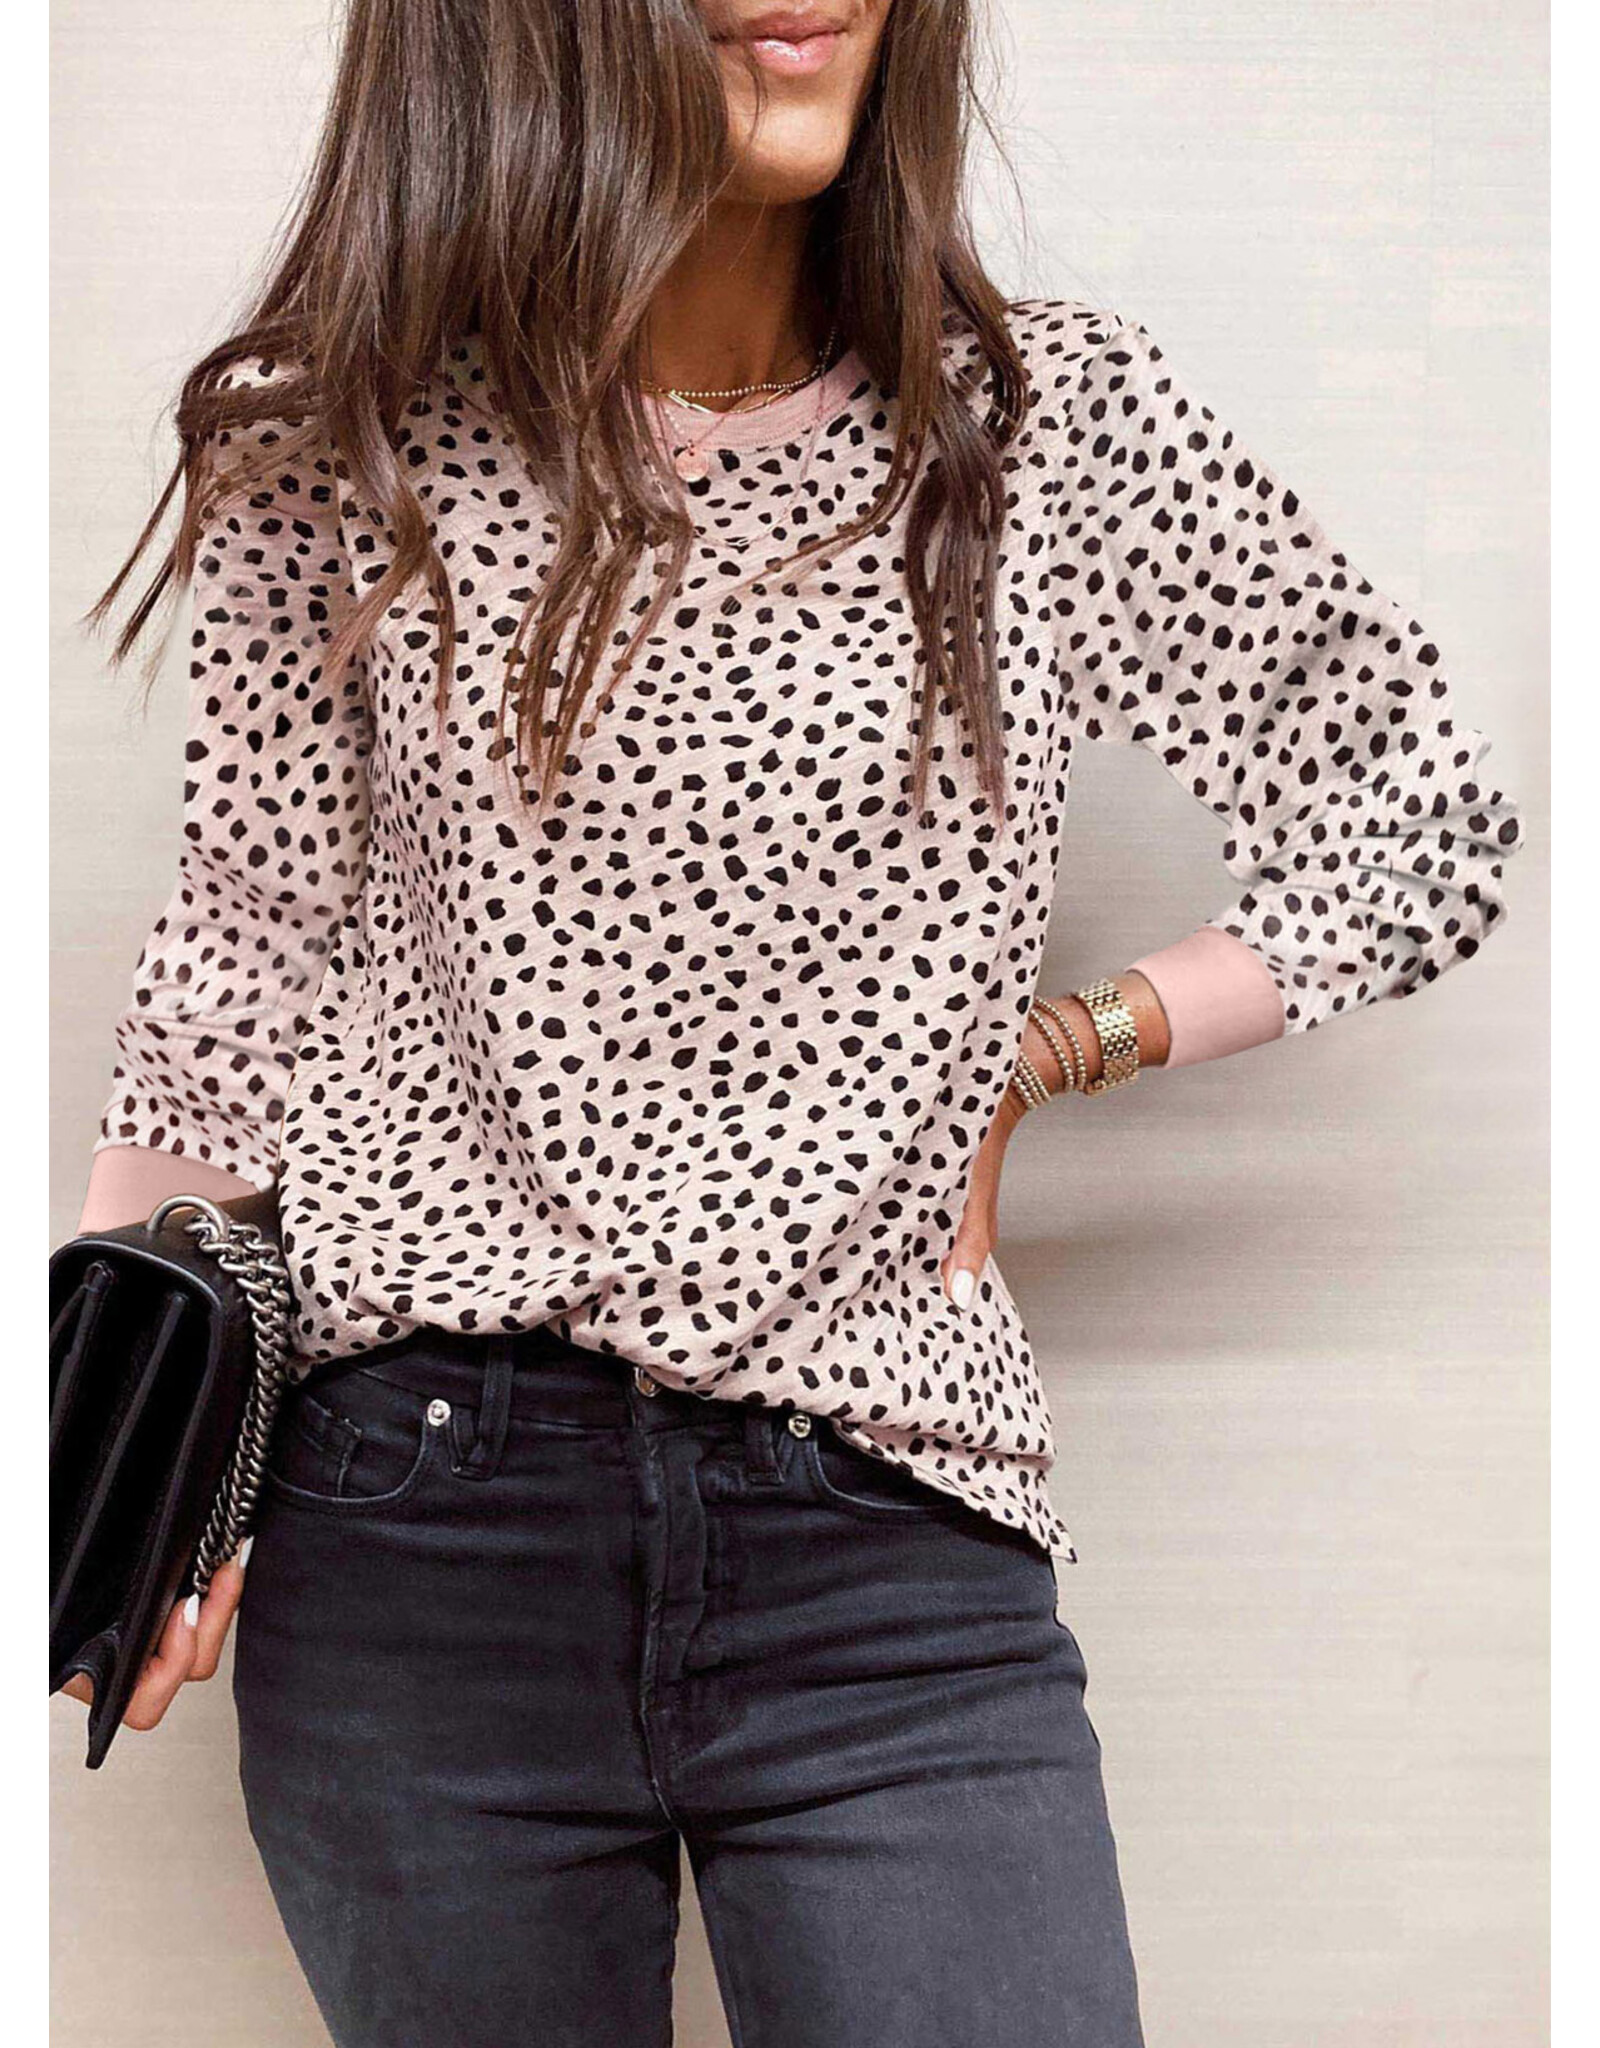 LATA Animal Spotted L/S Top